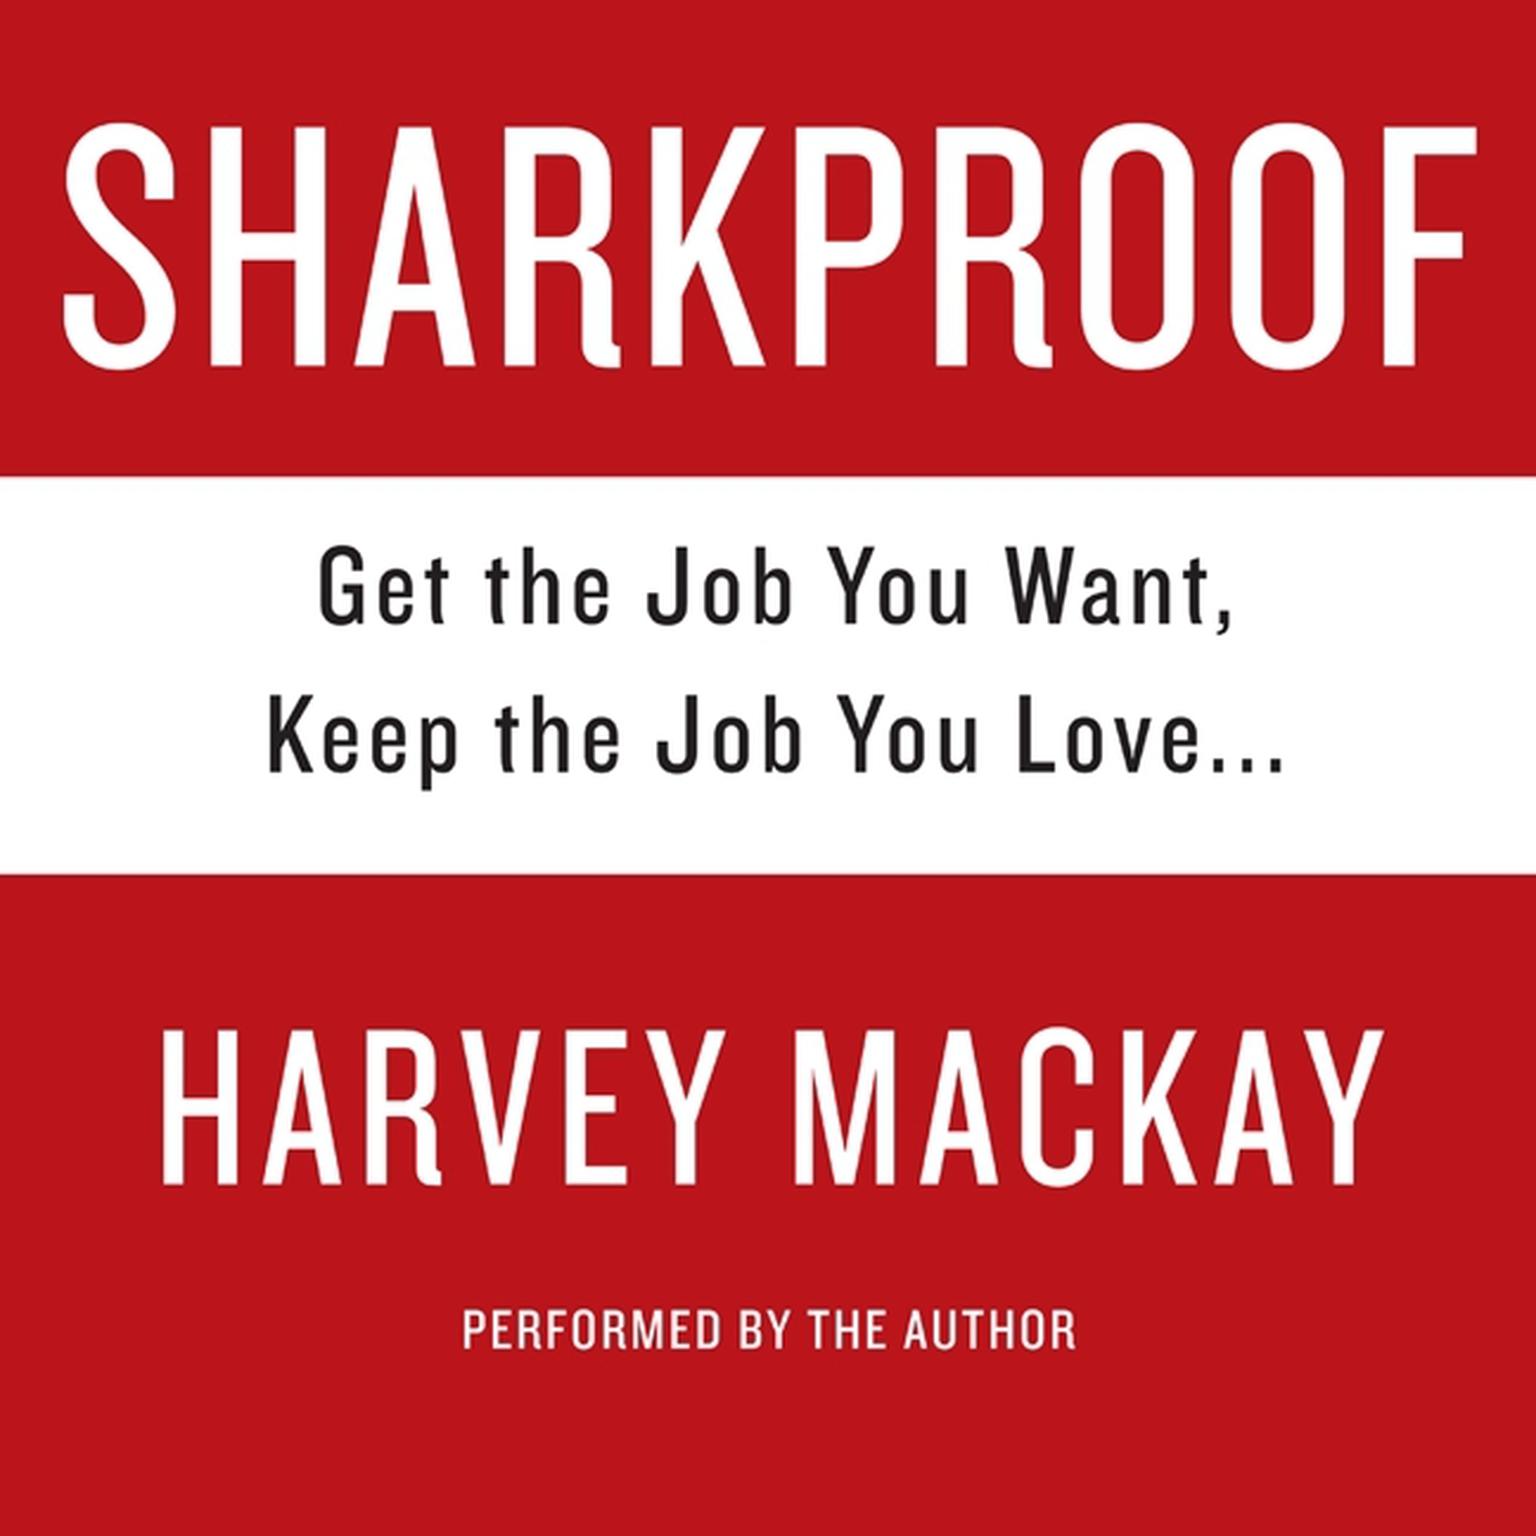 Sharkproof (Abridged): Get the Job You Want, Keep the Job You Love Audiobook, by Harvey Mackay